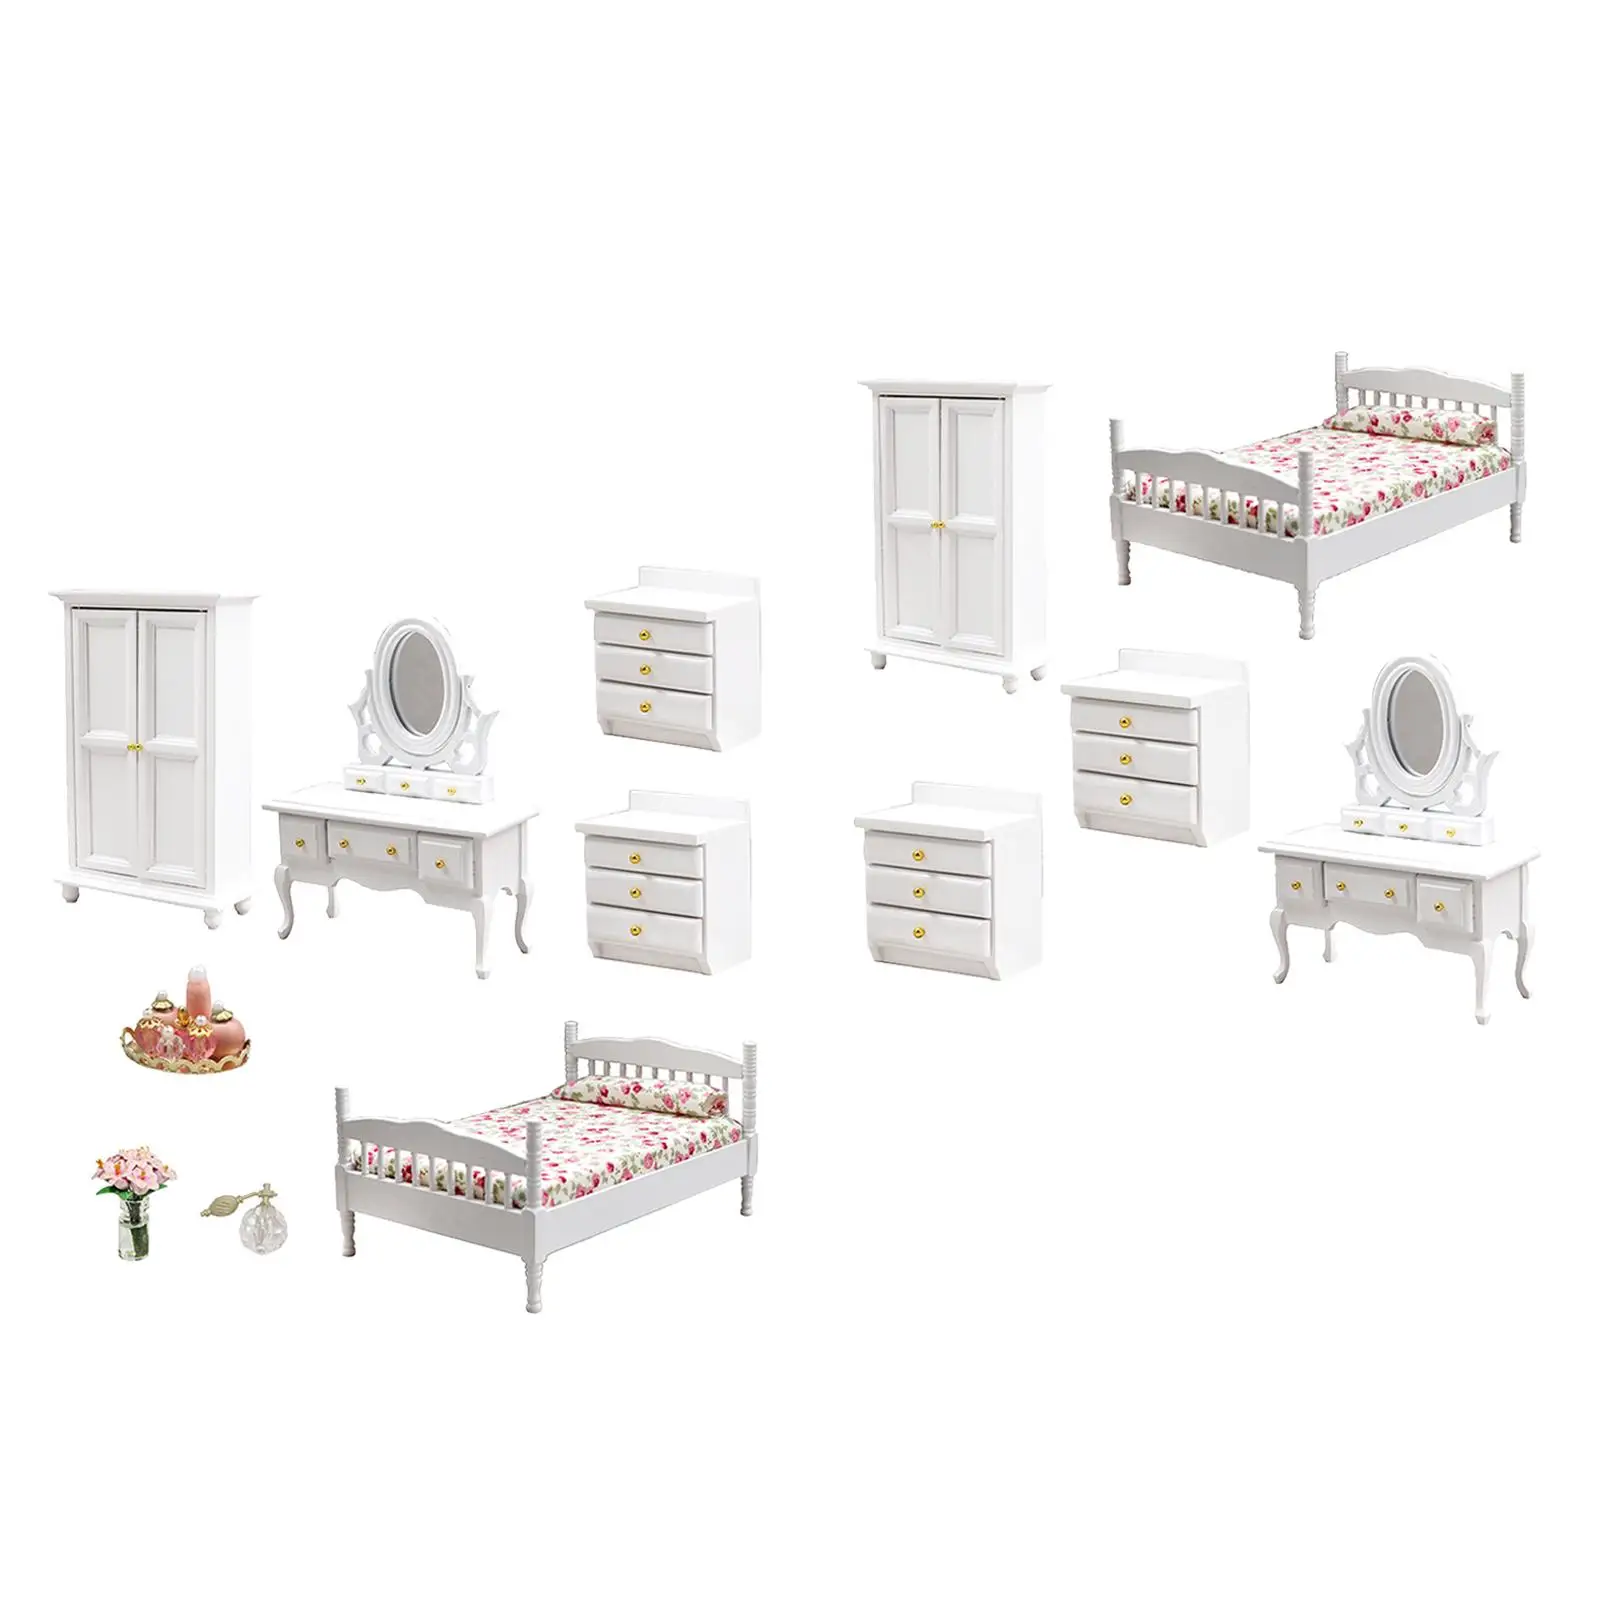 1:12 Scale Doll House Furniture Bedroom Set Wooden DIY Mini Simulation Decoration Accs Ornament Pretend Play Toys Life Scene images - 6